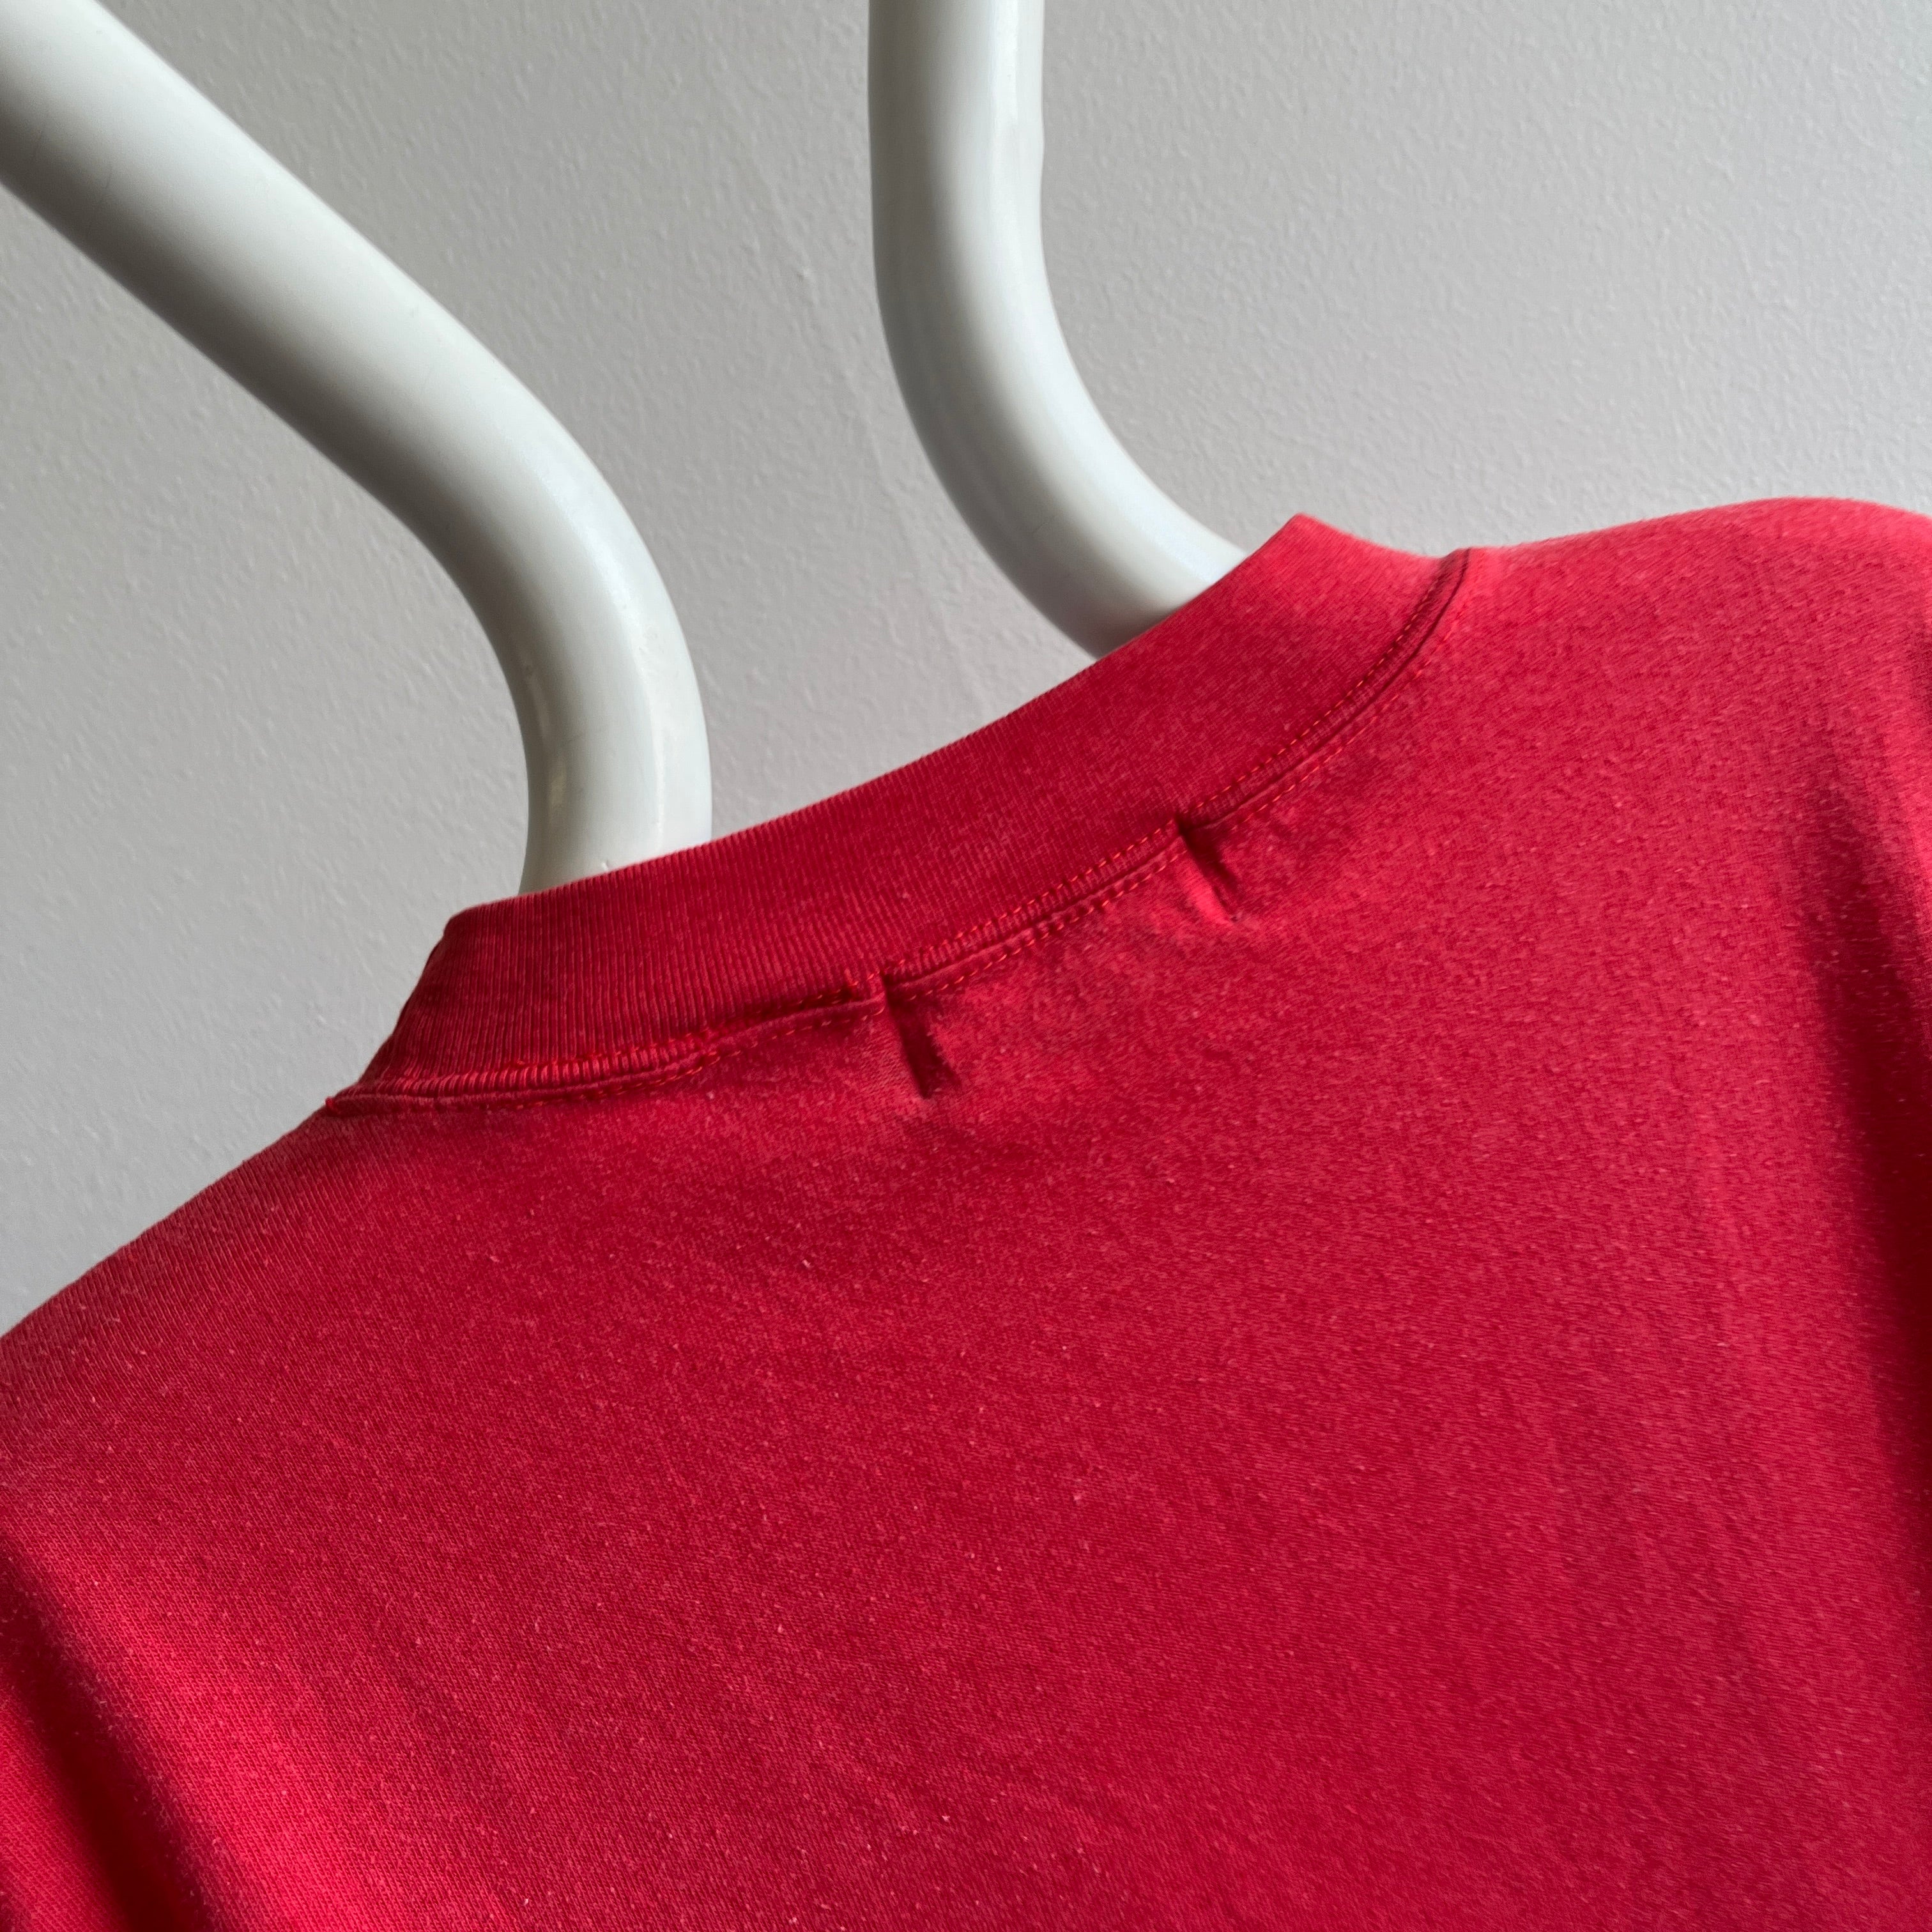 1980s Slouchy Boxy Red Pocket T-Shirt